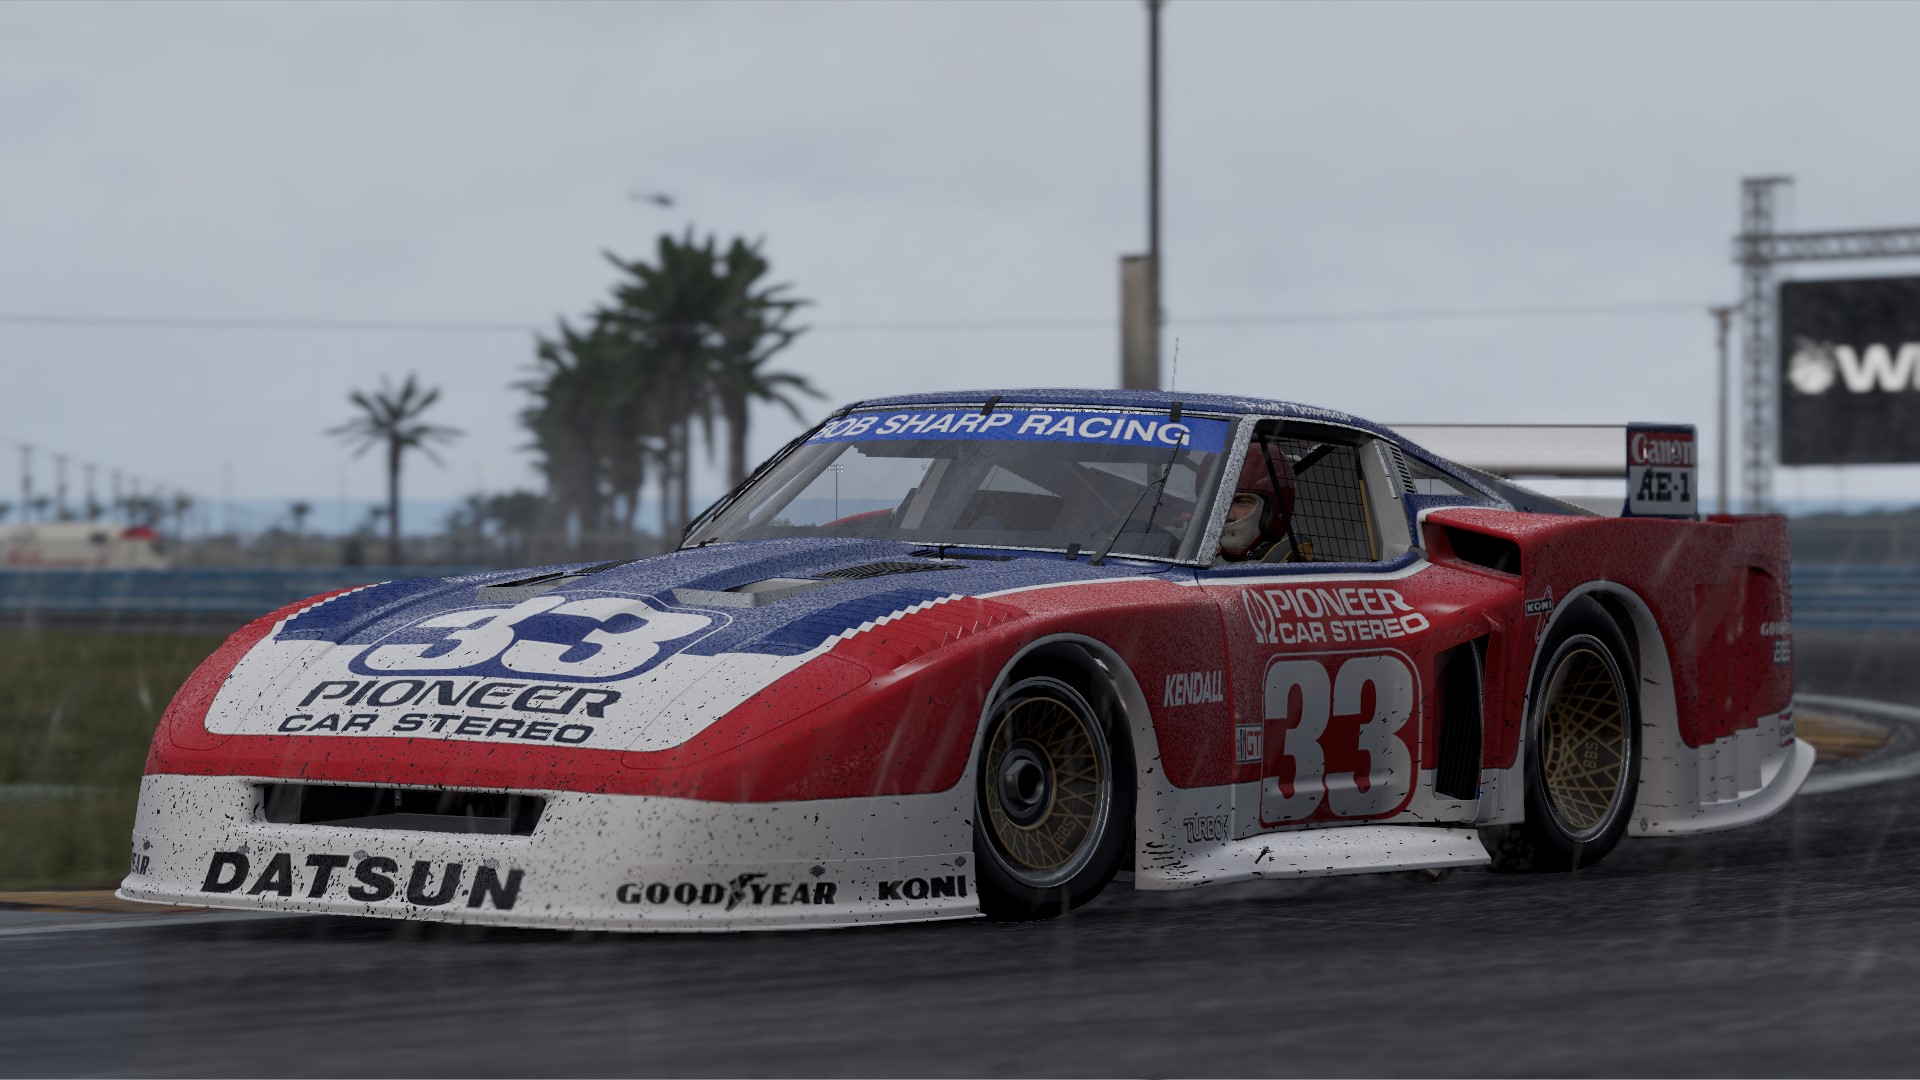 project cars 4 download free